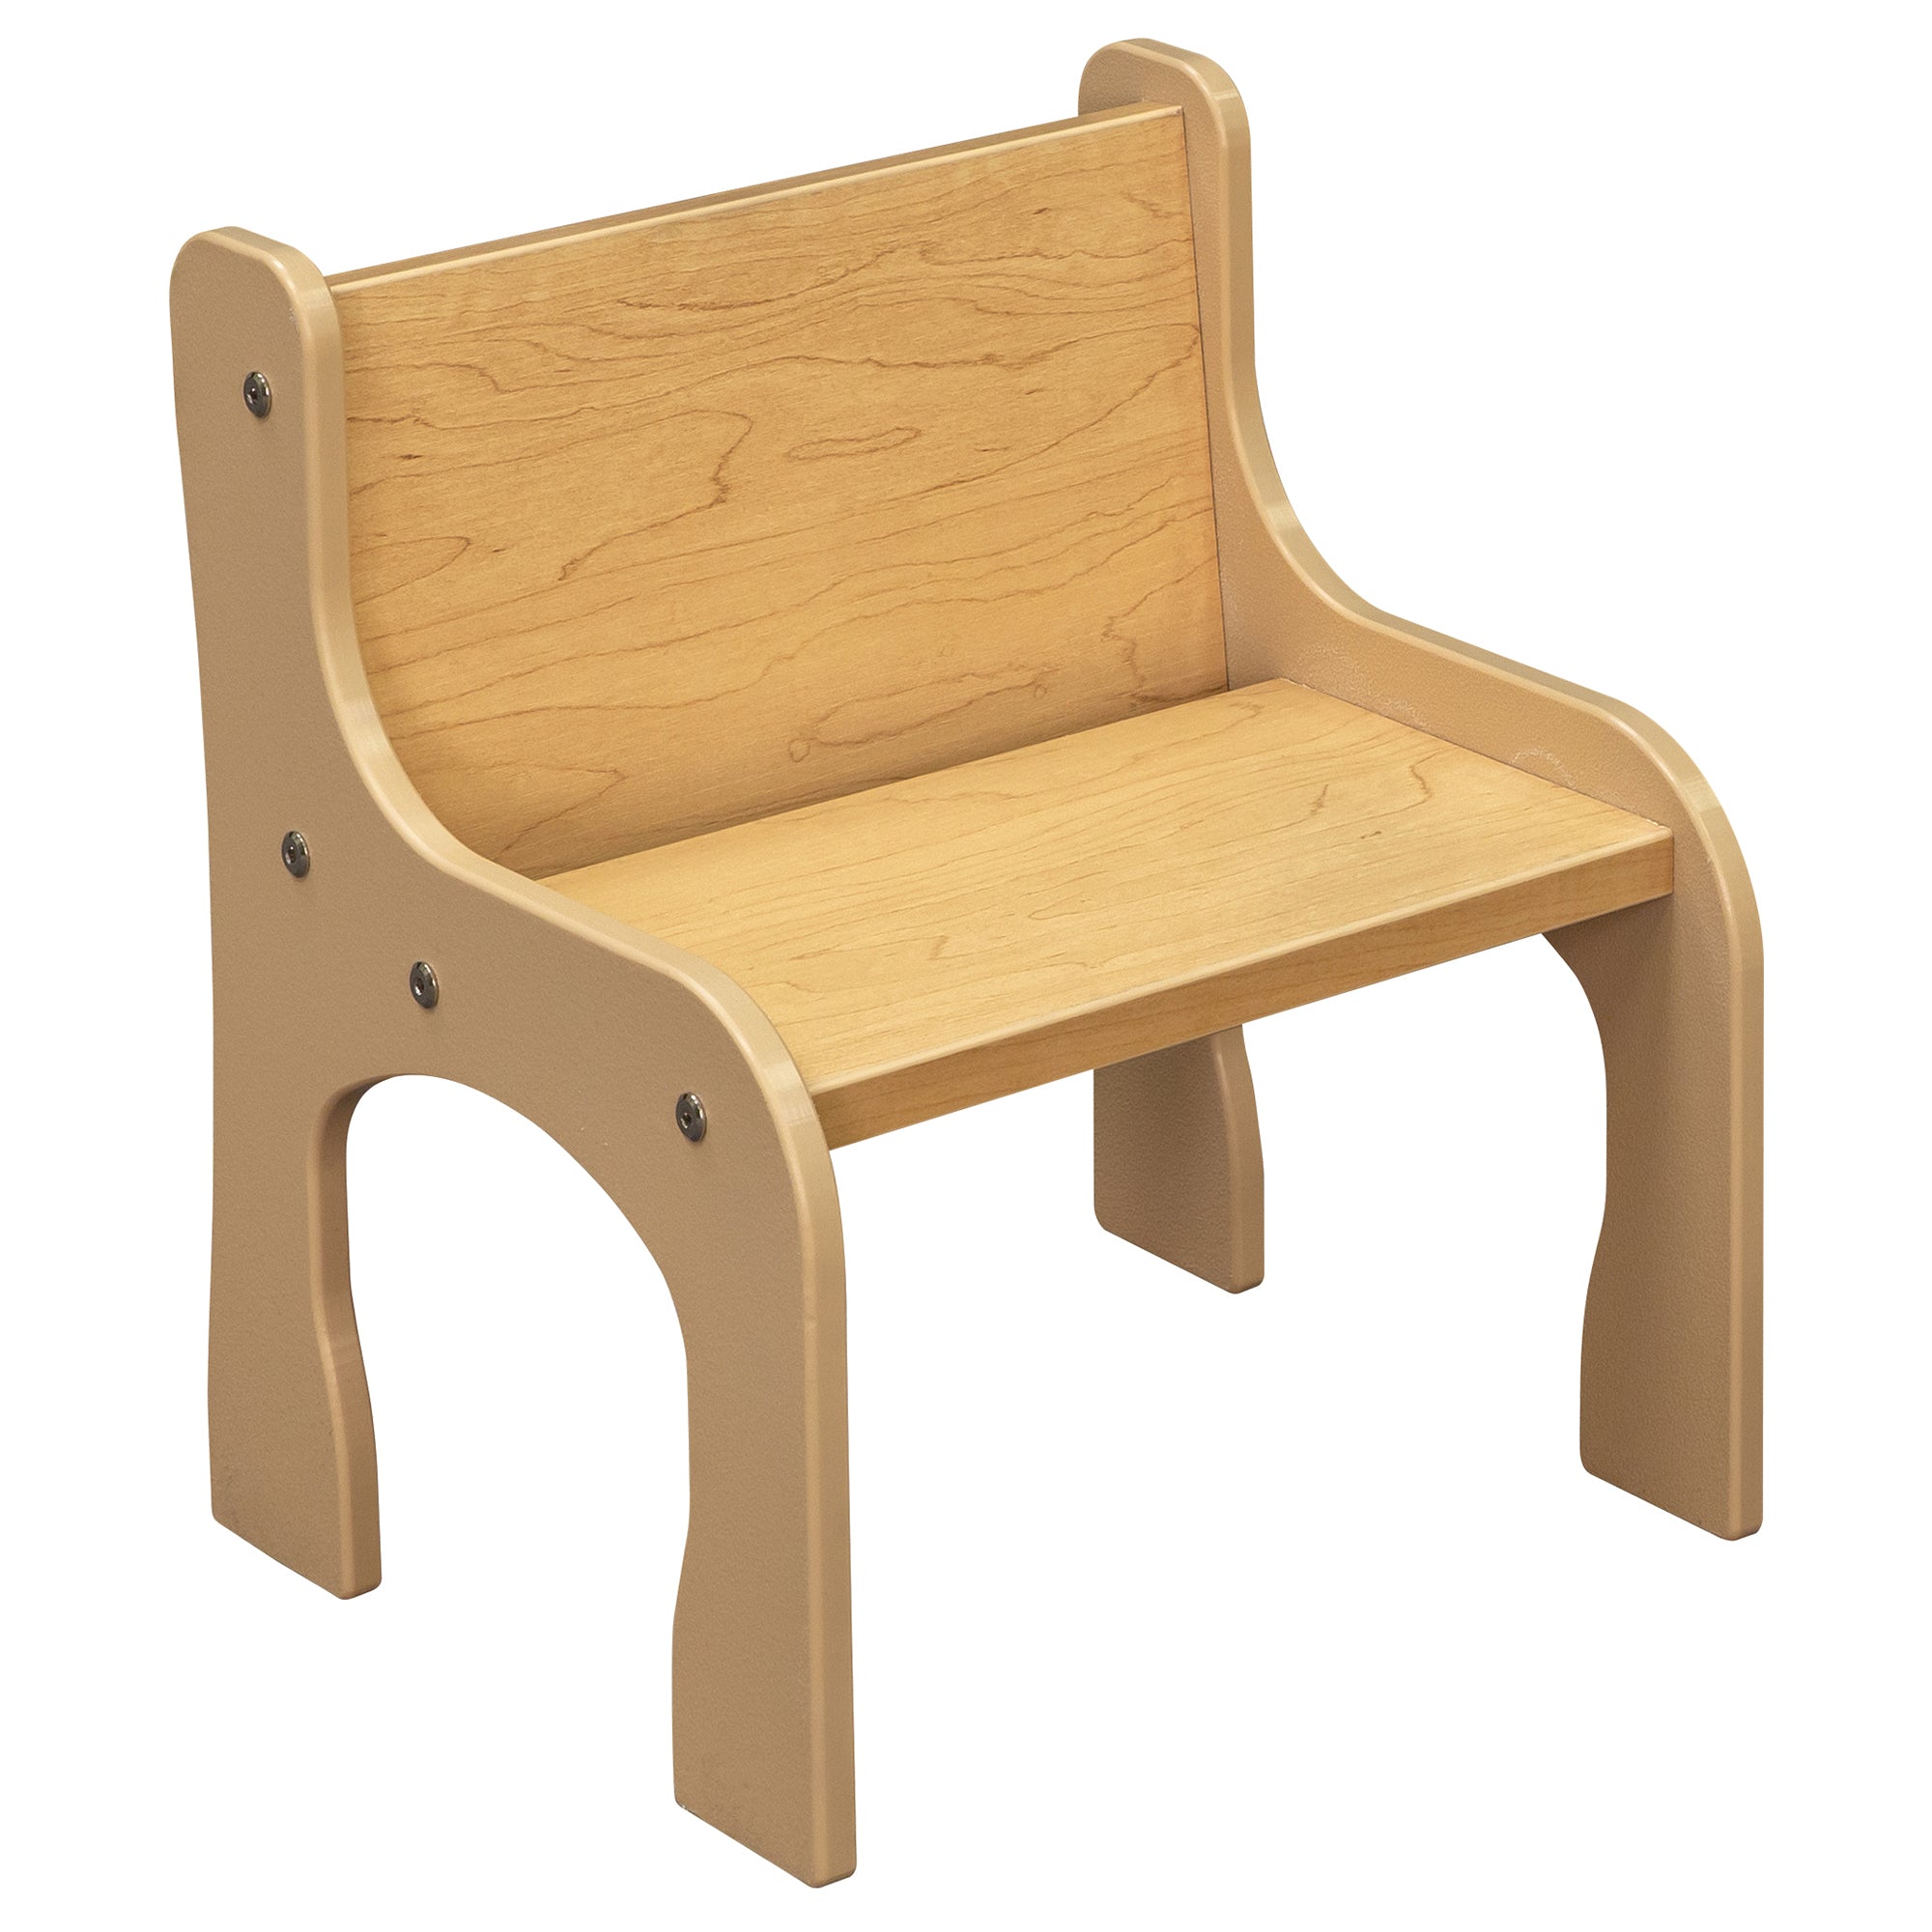 Eight Inch Child's Activity Chair Made From Maple Wood